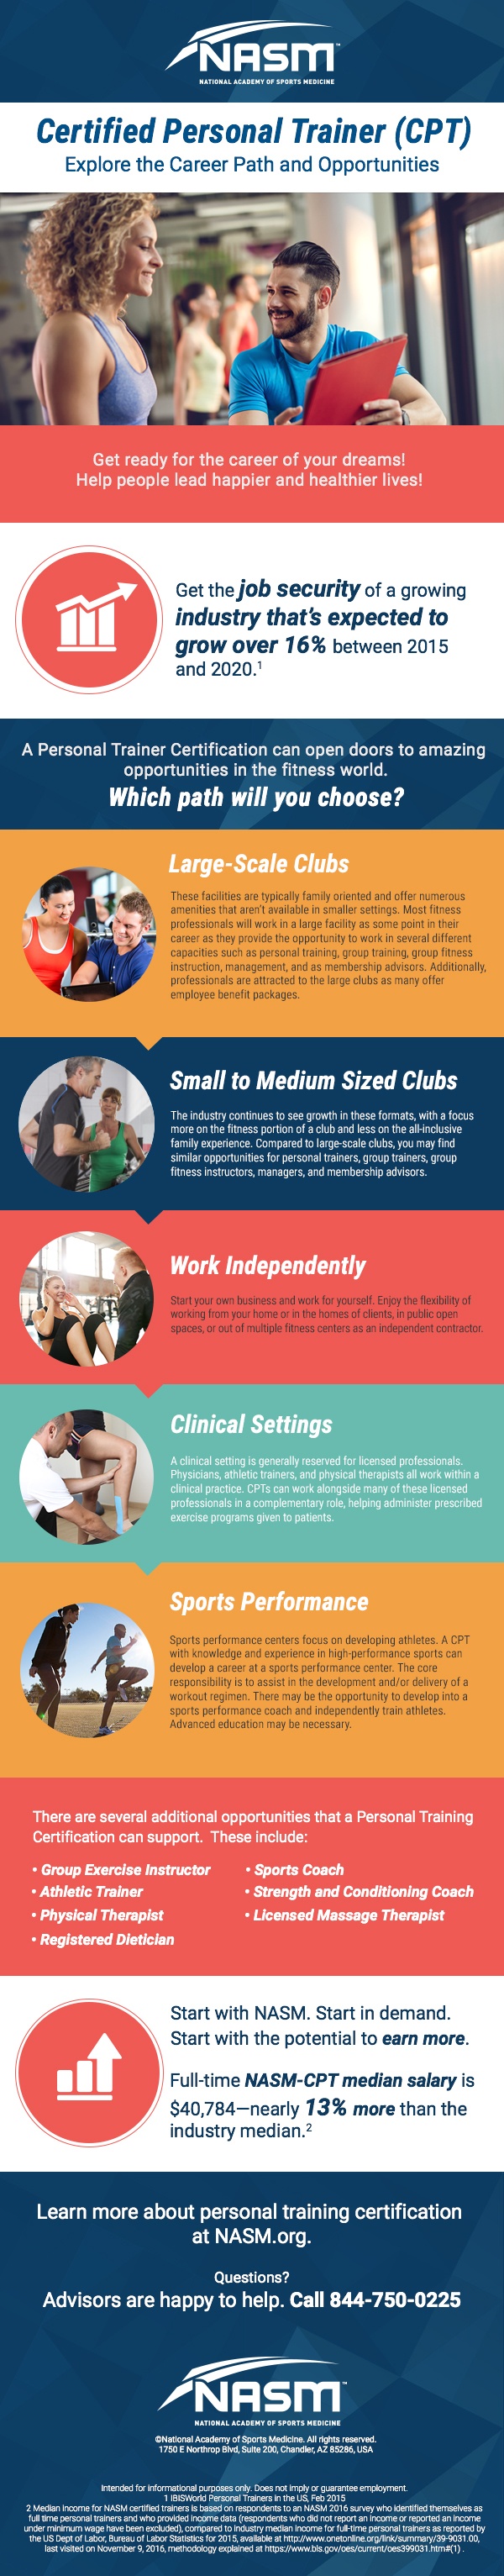 The Career Paths of a Personal Trainer - NASM